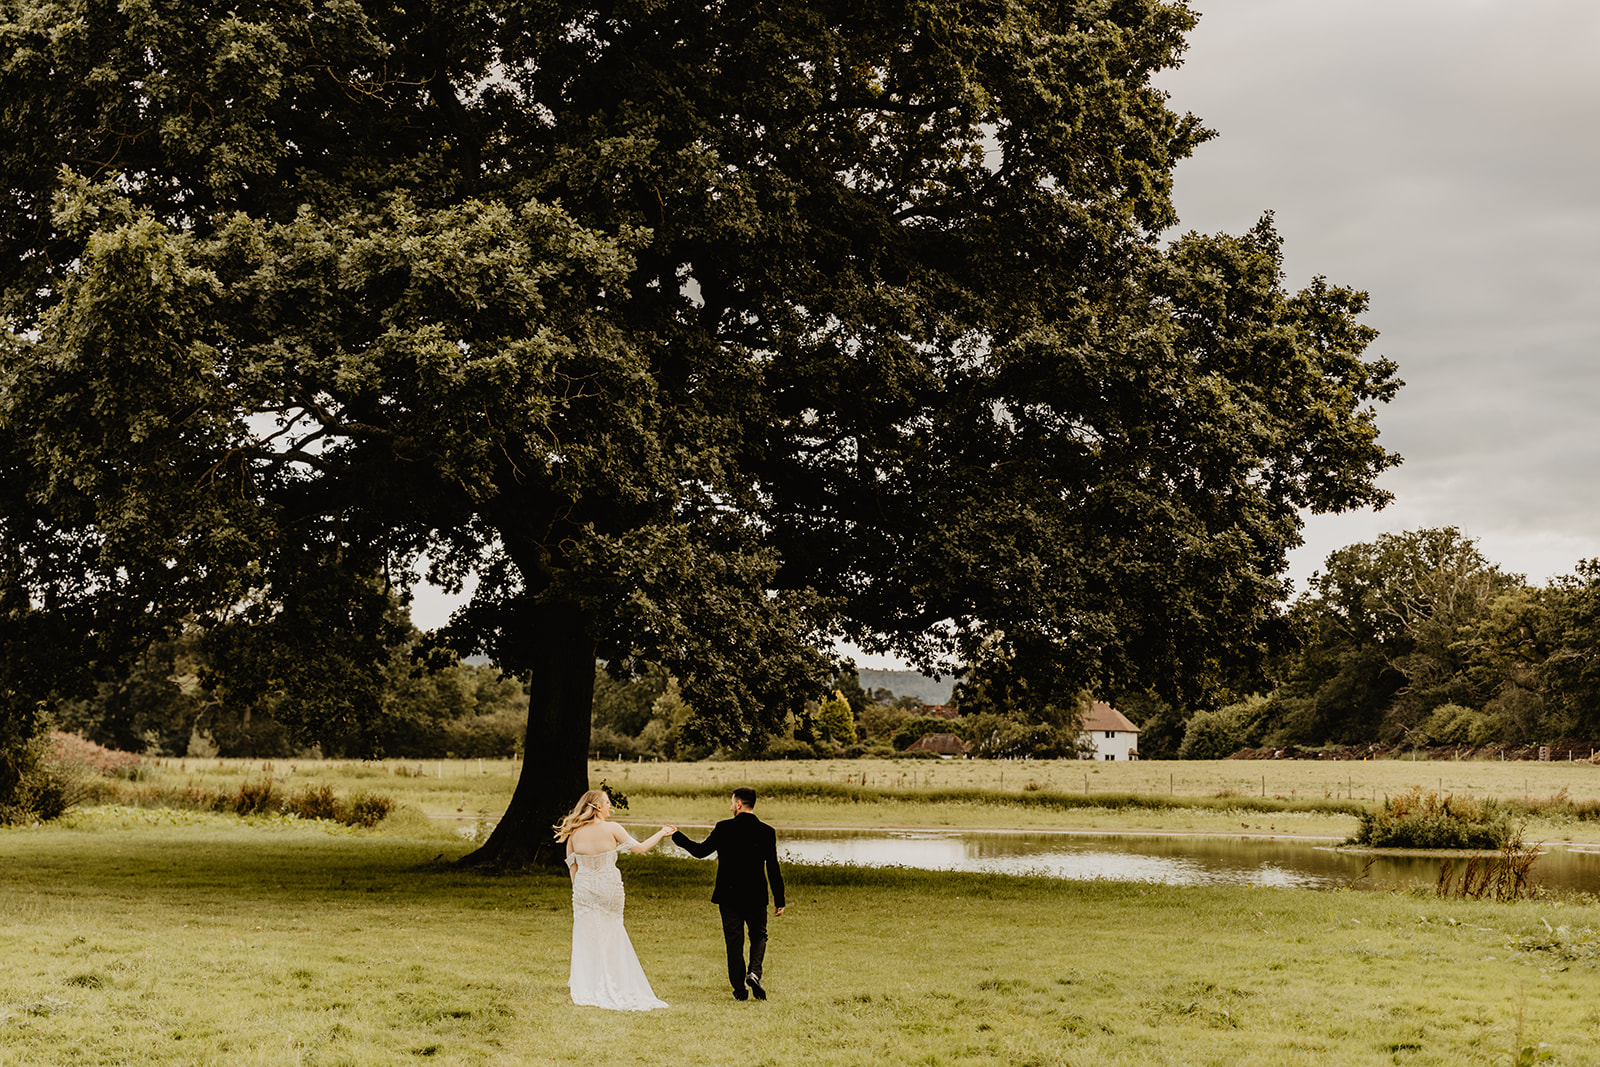 Bride and groom couples portraits at a Southlands barn wedding, Sussex. Photo by OliveJoy Photography.